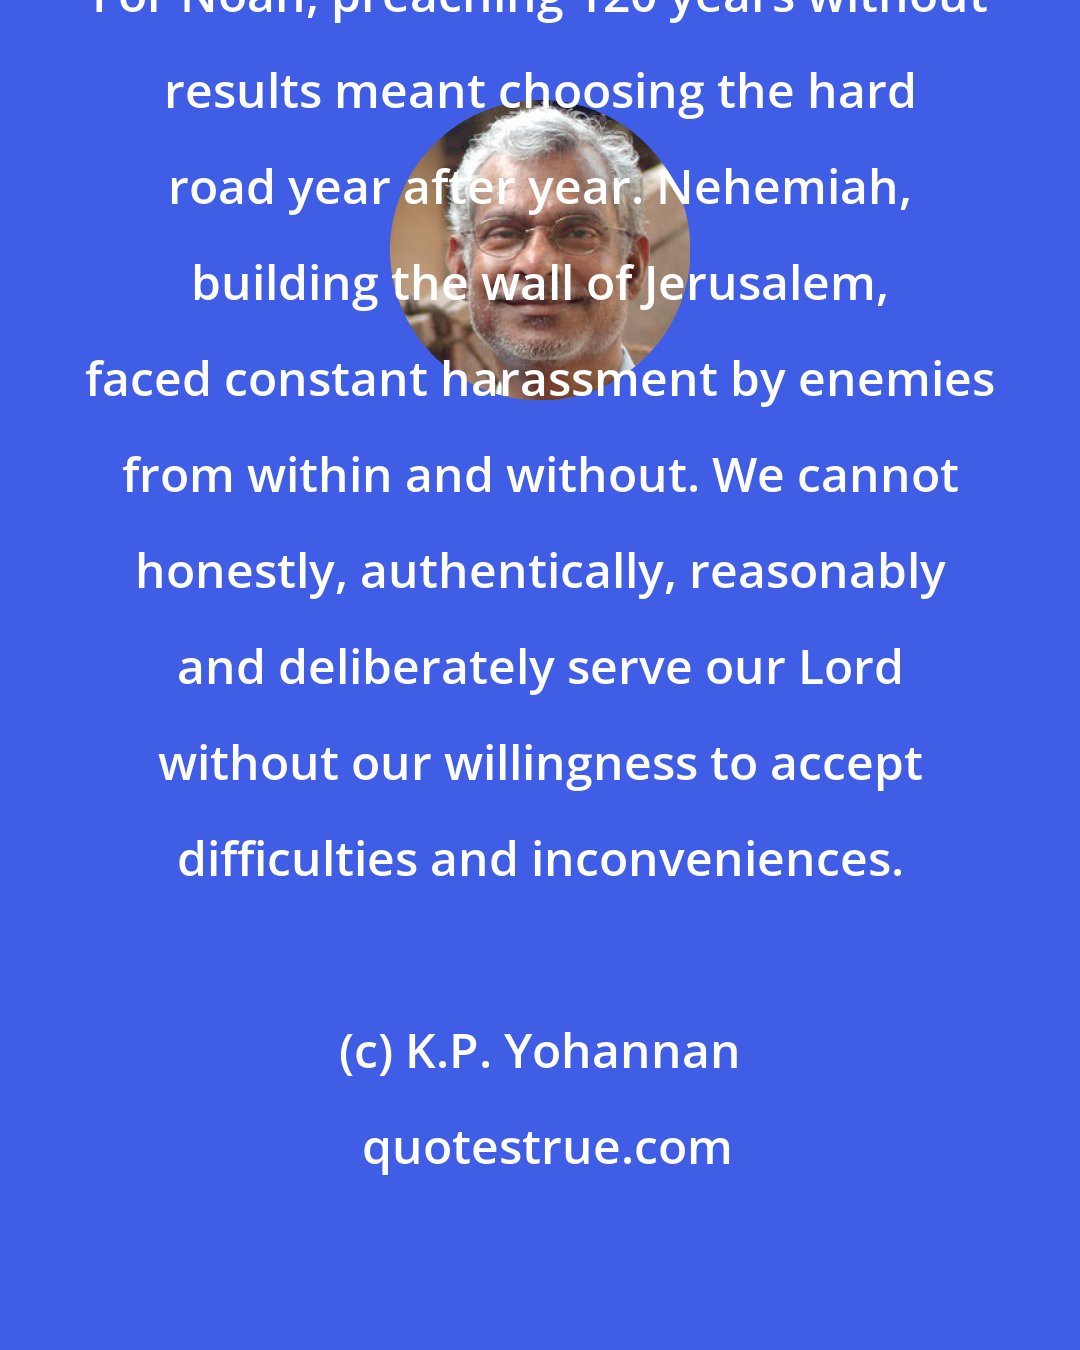 K.P. Yohannan: For Noah, preaching 120 years without results meant choosing the hard road year after year. Nehemiah, building the wall of Jerusalem, faced constant harassment by enemies from within and without. We cannot honestly, authentically, reasonably and deliberately serve our Lord without our willingness to accept difficulties and inconveniences.